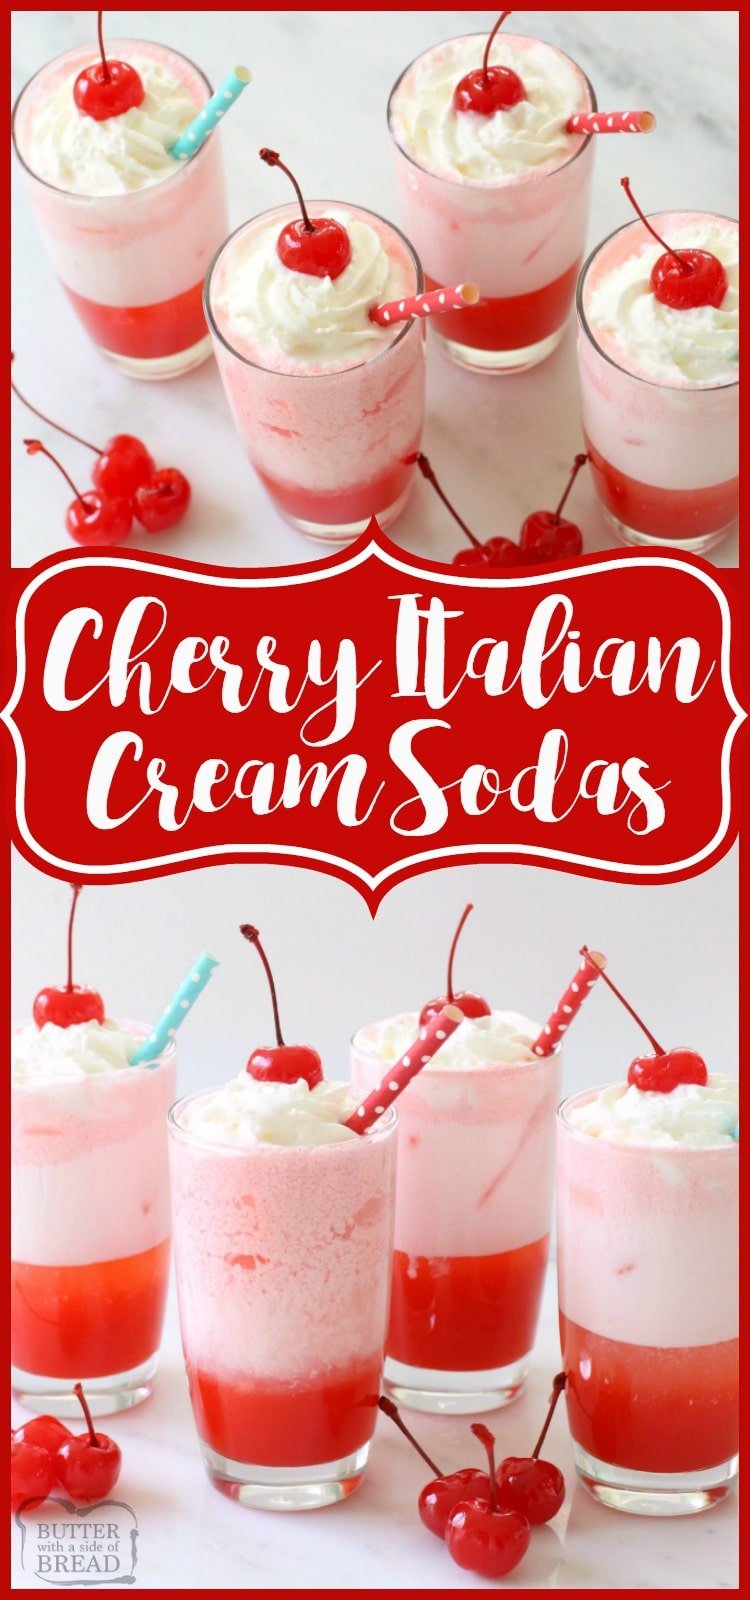 Cherry Italian Cream Sodas made with our simple 2-ingredient recipe for homemade cherry syrup! These fancy drinks are easy to make and so tasty! Festive #drink #recipe from Butter With A Side of Bread